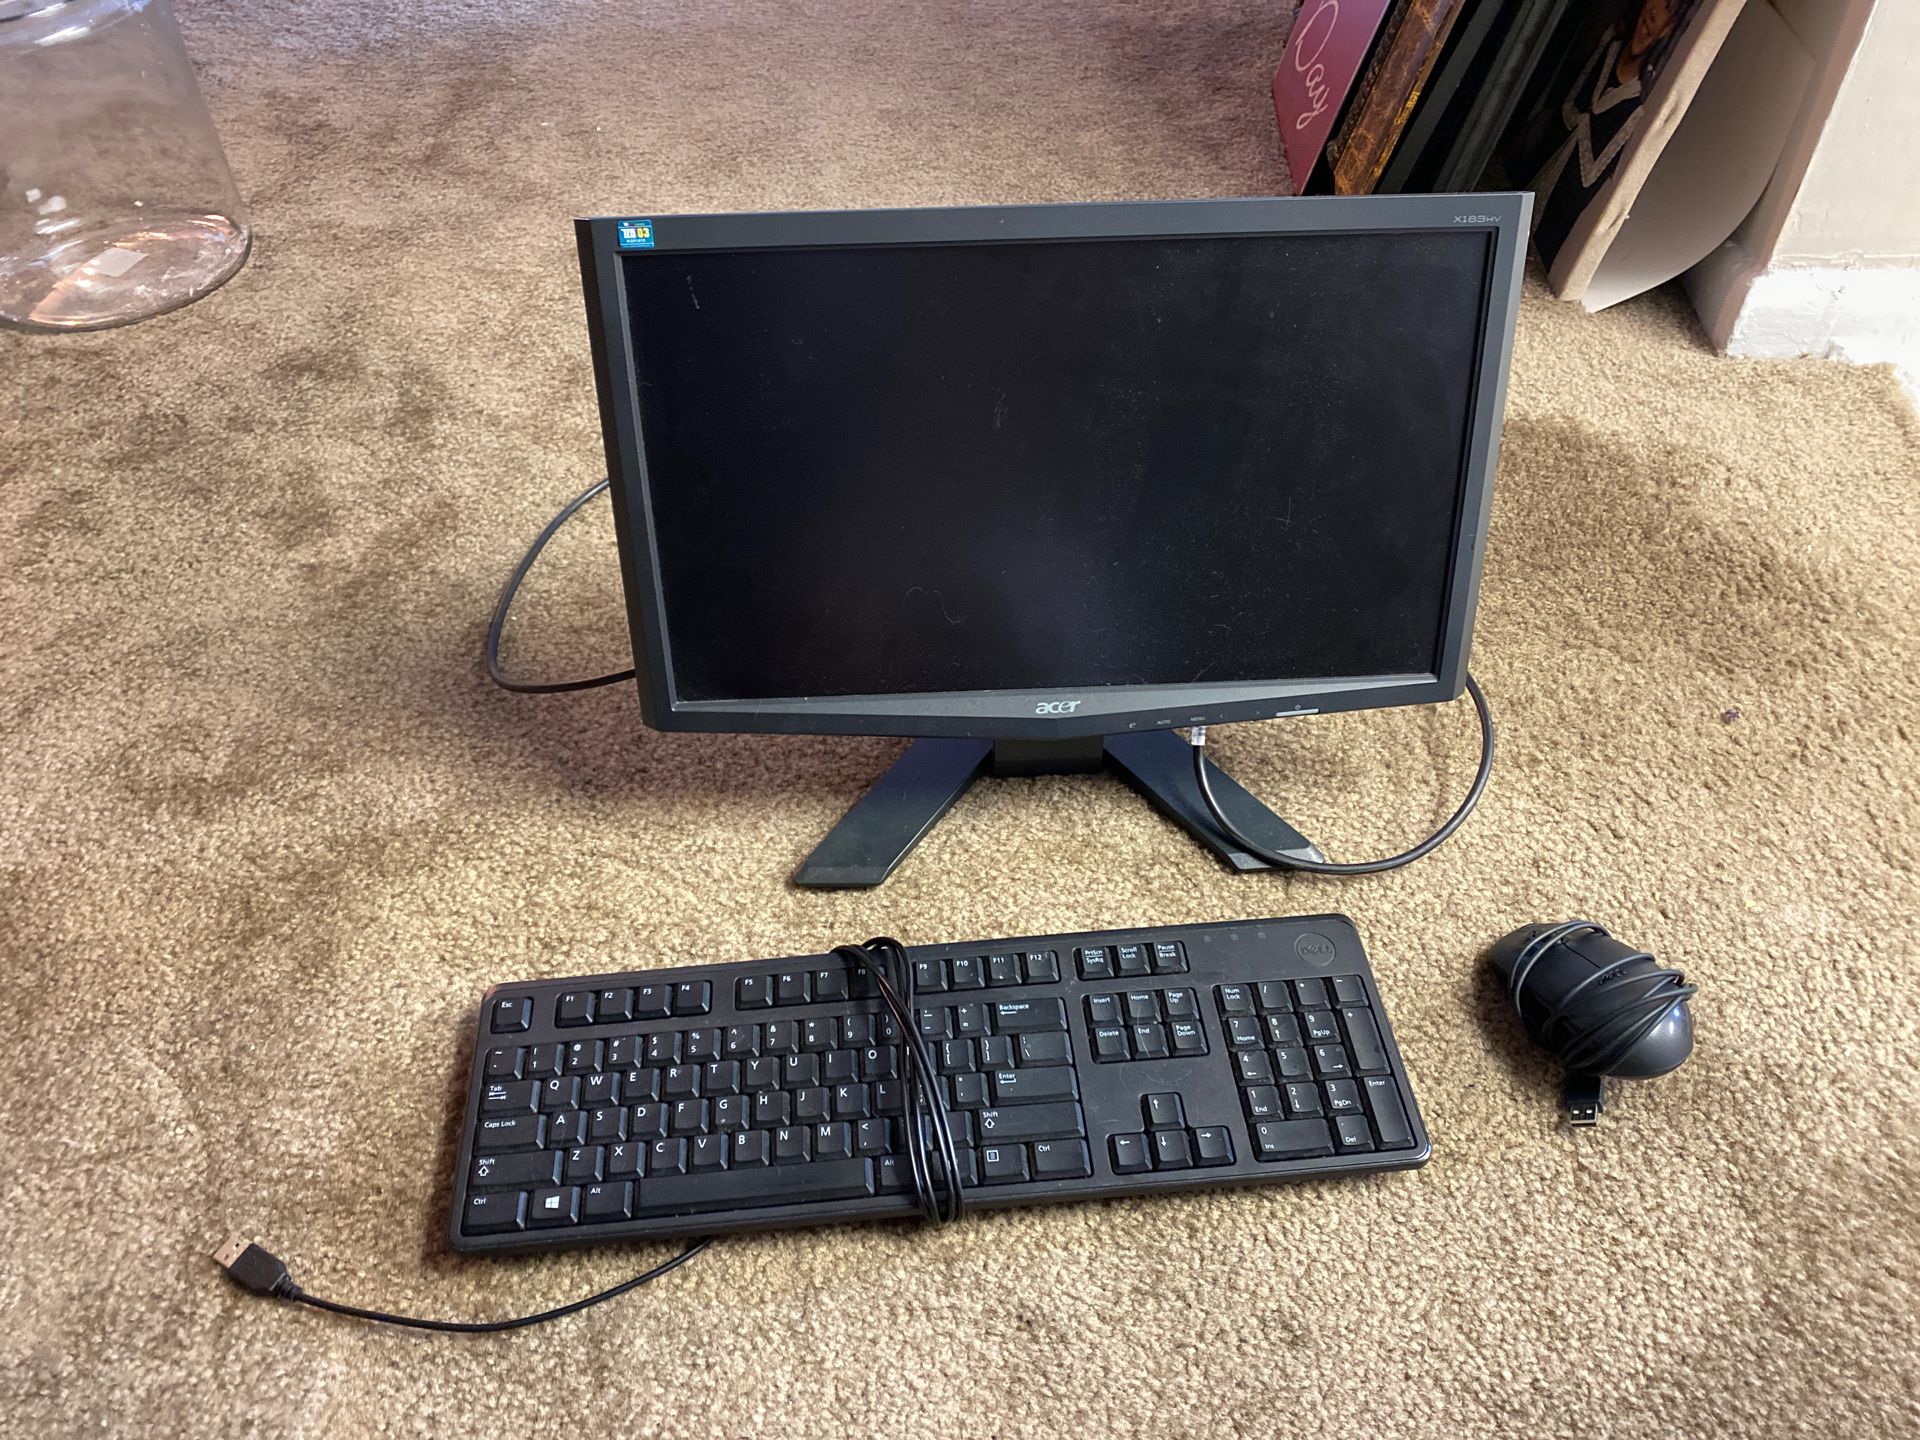 Acer LED computer monitor